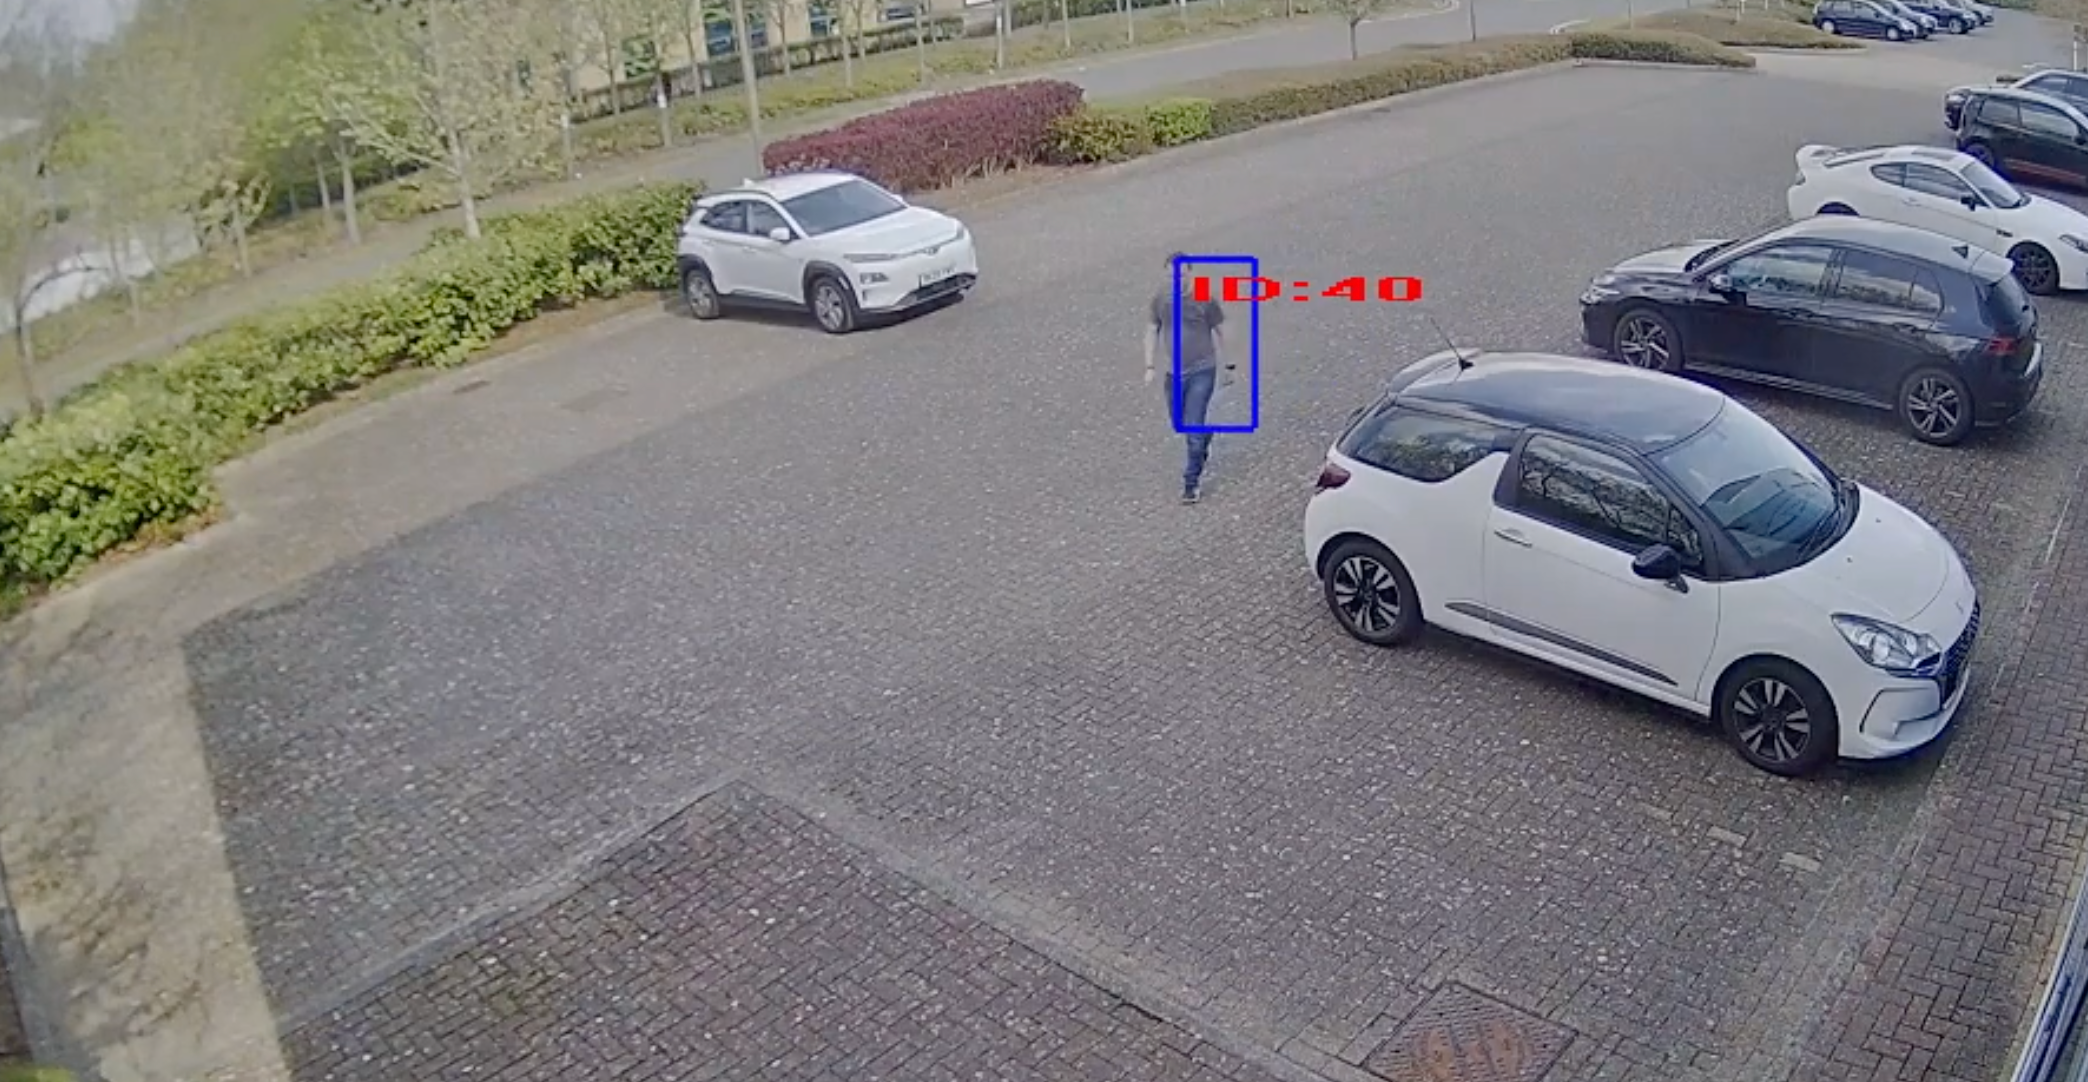 IVS 2.2 - Human and Vehicle Detection